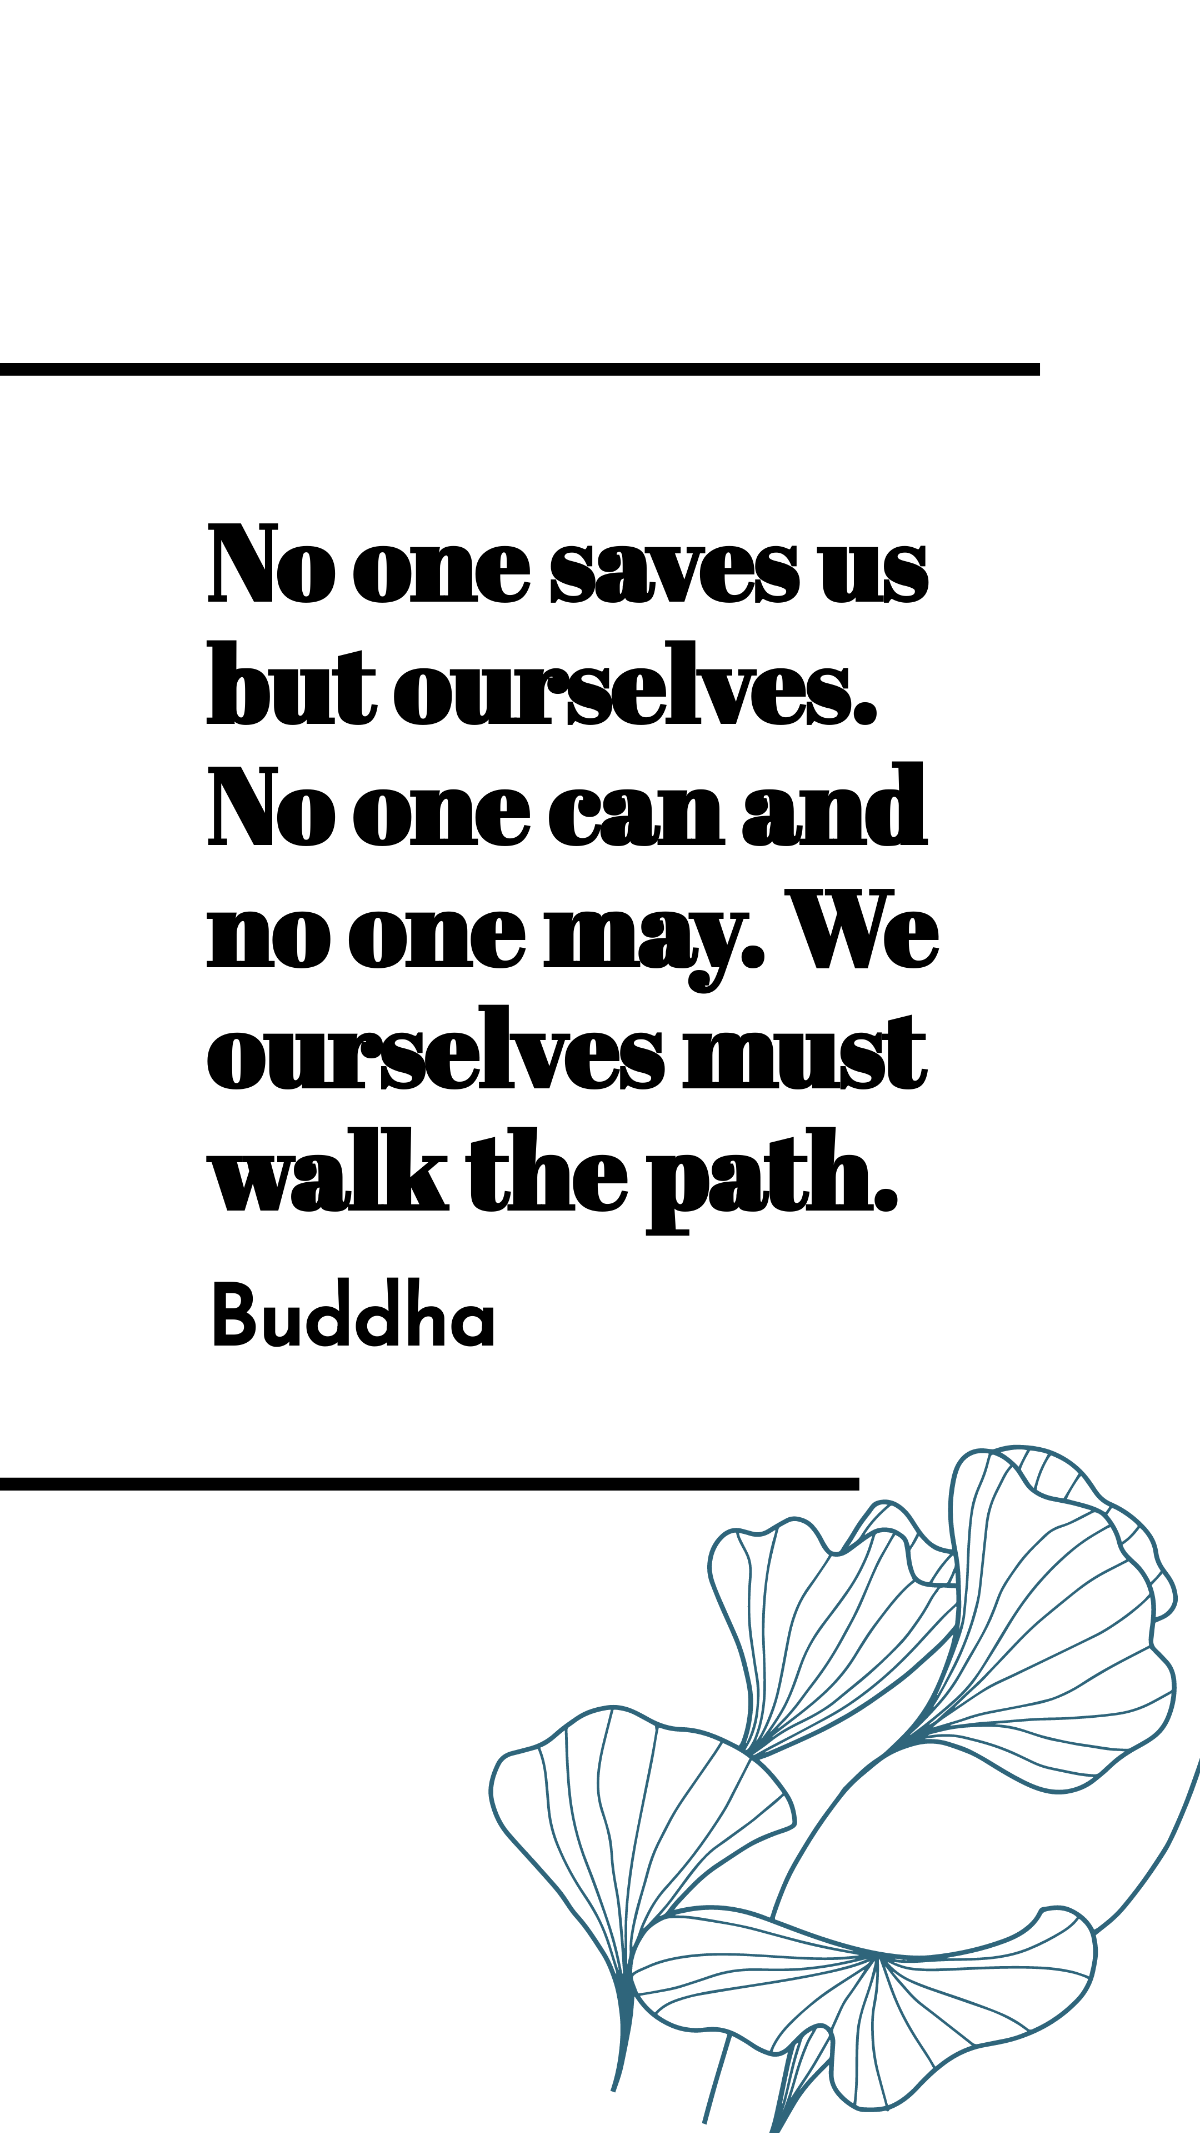 Free Buddha - No one saves us but ourselves. No one can and no one may. We ourselves must walk the path. Template